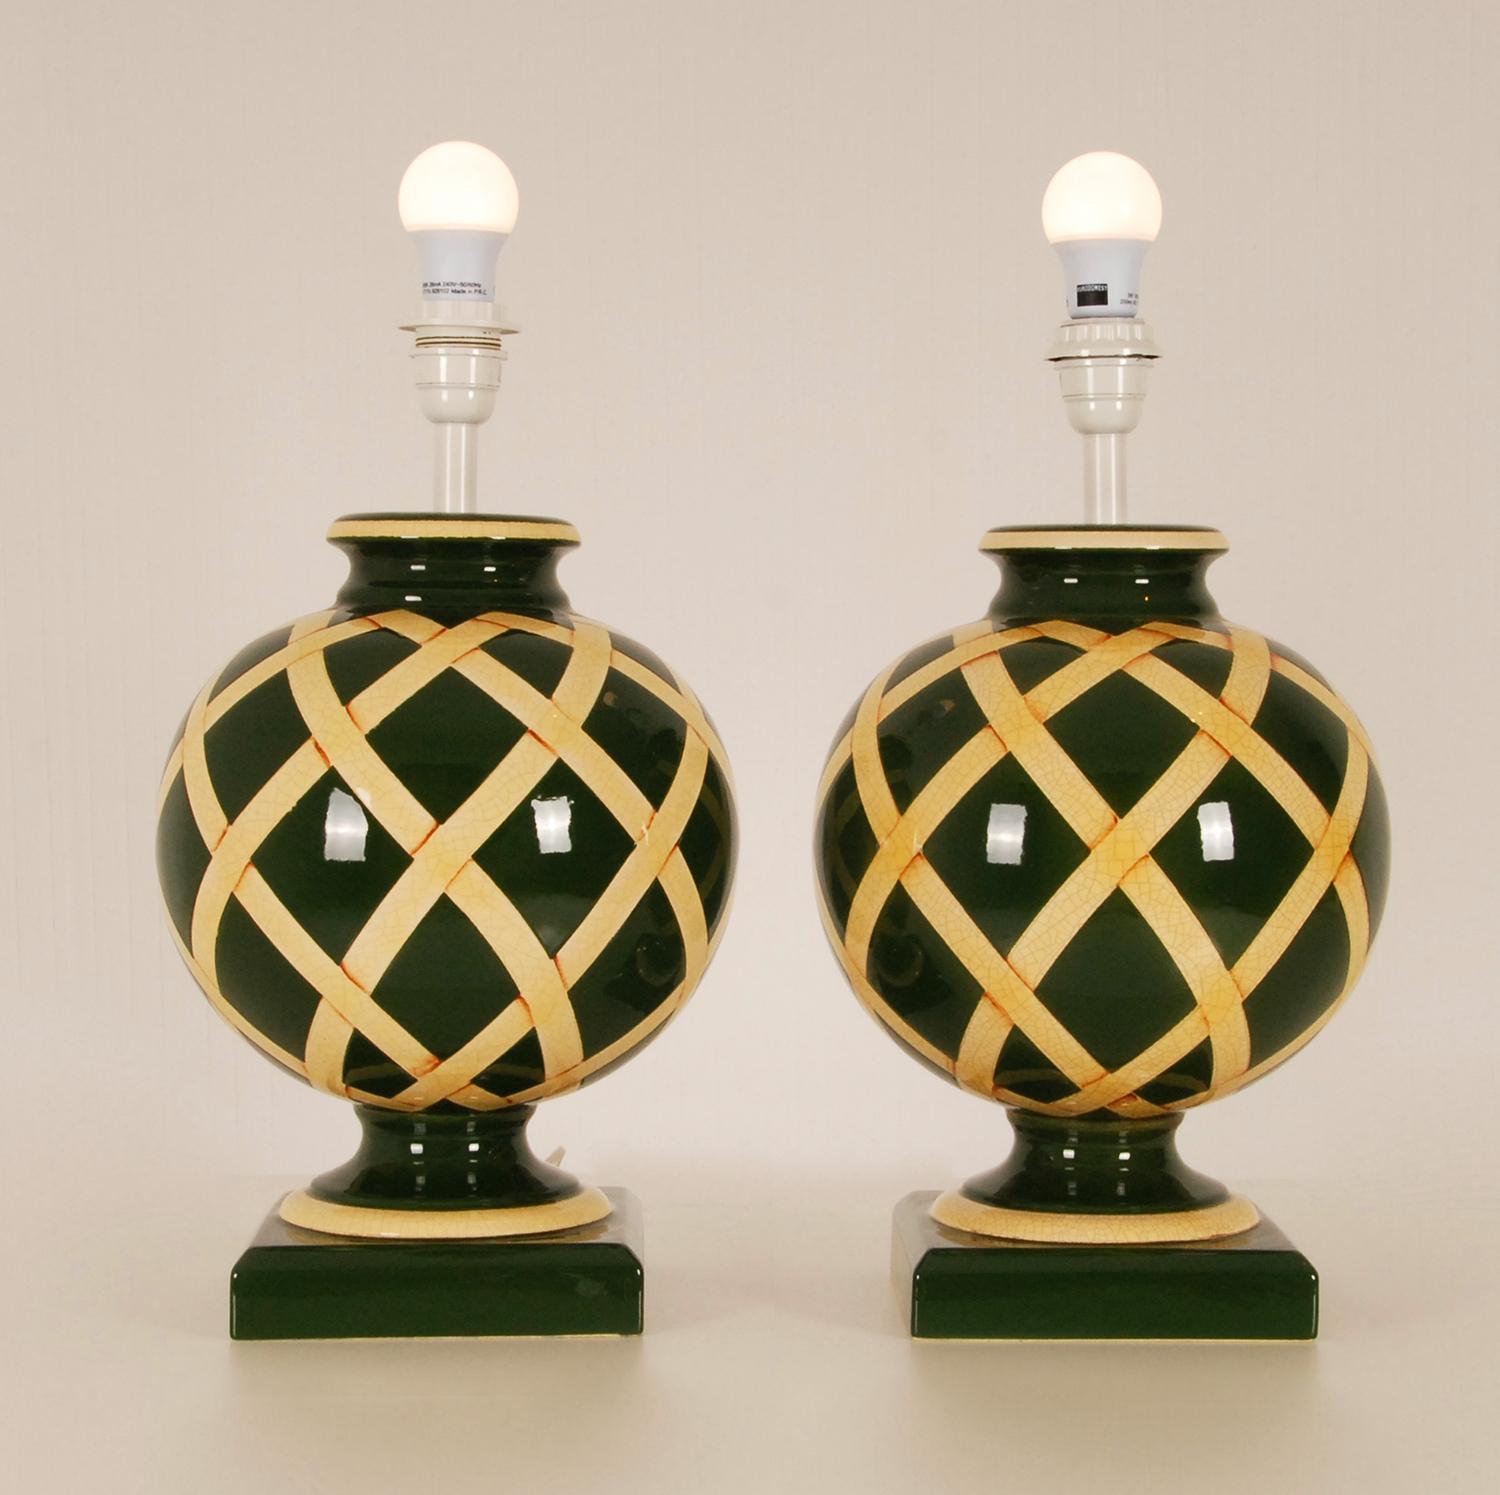 Hand-Crafted Vintage French Ceramic Vase Table Lamps Green Beige Argyle Pattern, a Pair For Sale